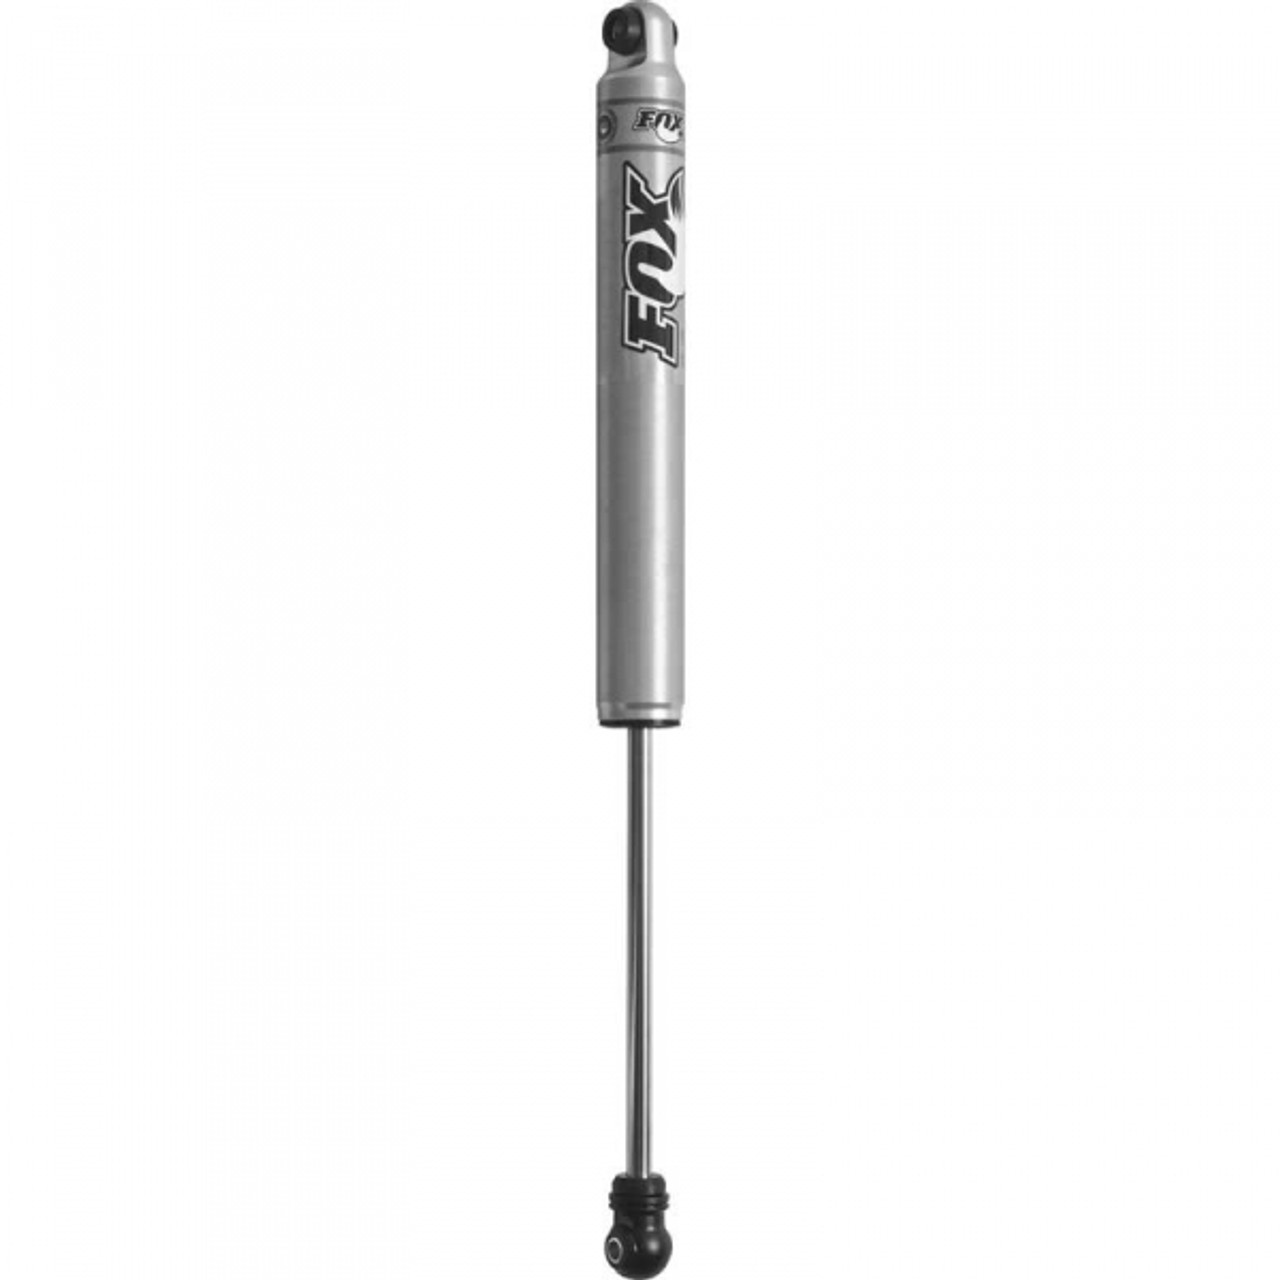 Fox 2.0 Performance Series IFP Shock Absorber 1999 to 2004 Ford F250/350 (Front) Lifted 1.5" to 3"| 1999 to 2016 Ford F440/5502WD/4WD Cab & Chassis (Front) Lifted 0 to 1.5" (FOX980-24-656)-Main View